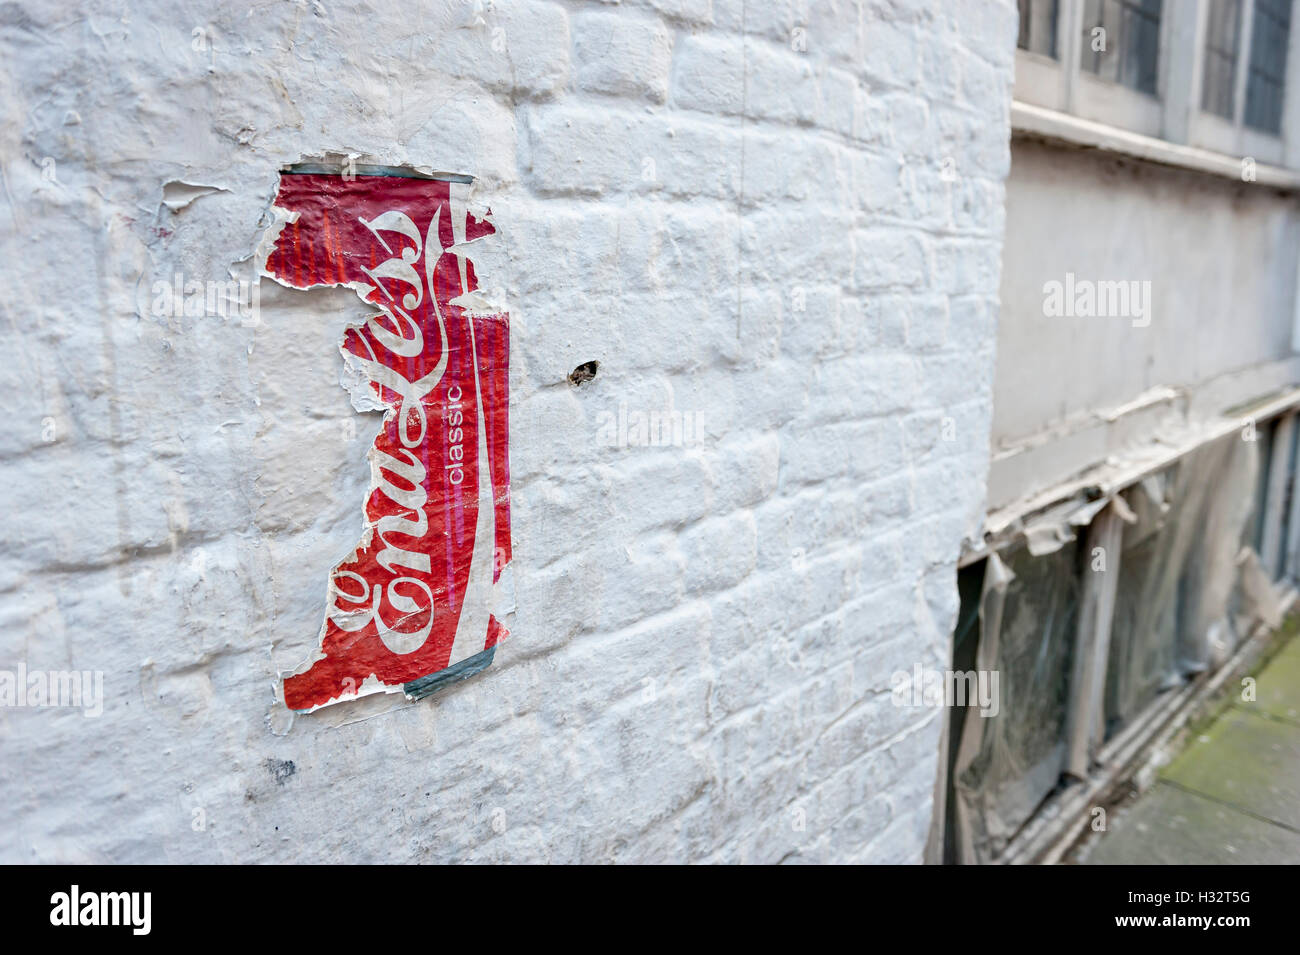 Stencil street art what looks like a coca cola can but says Endless by Endless Stock Photo